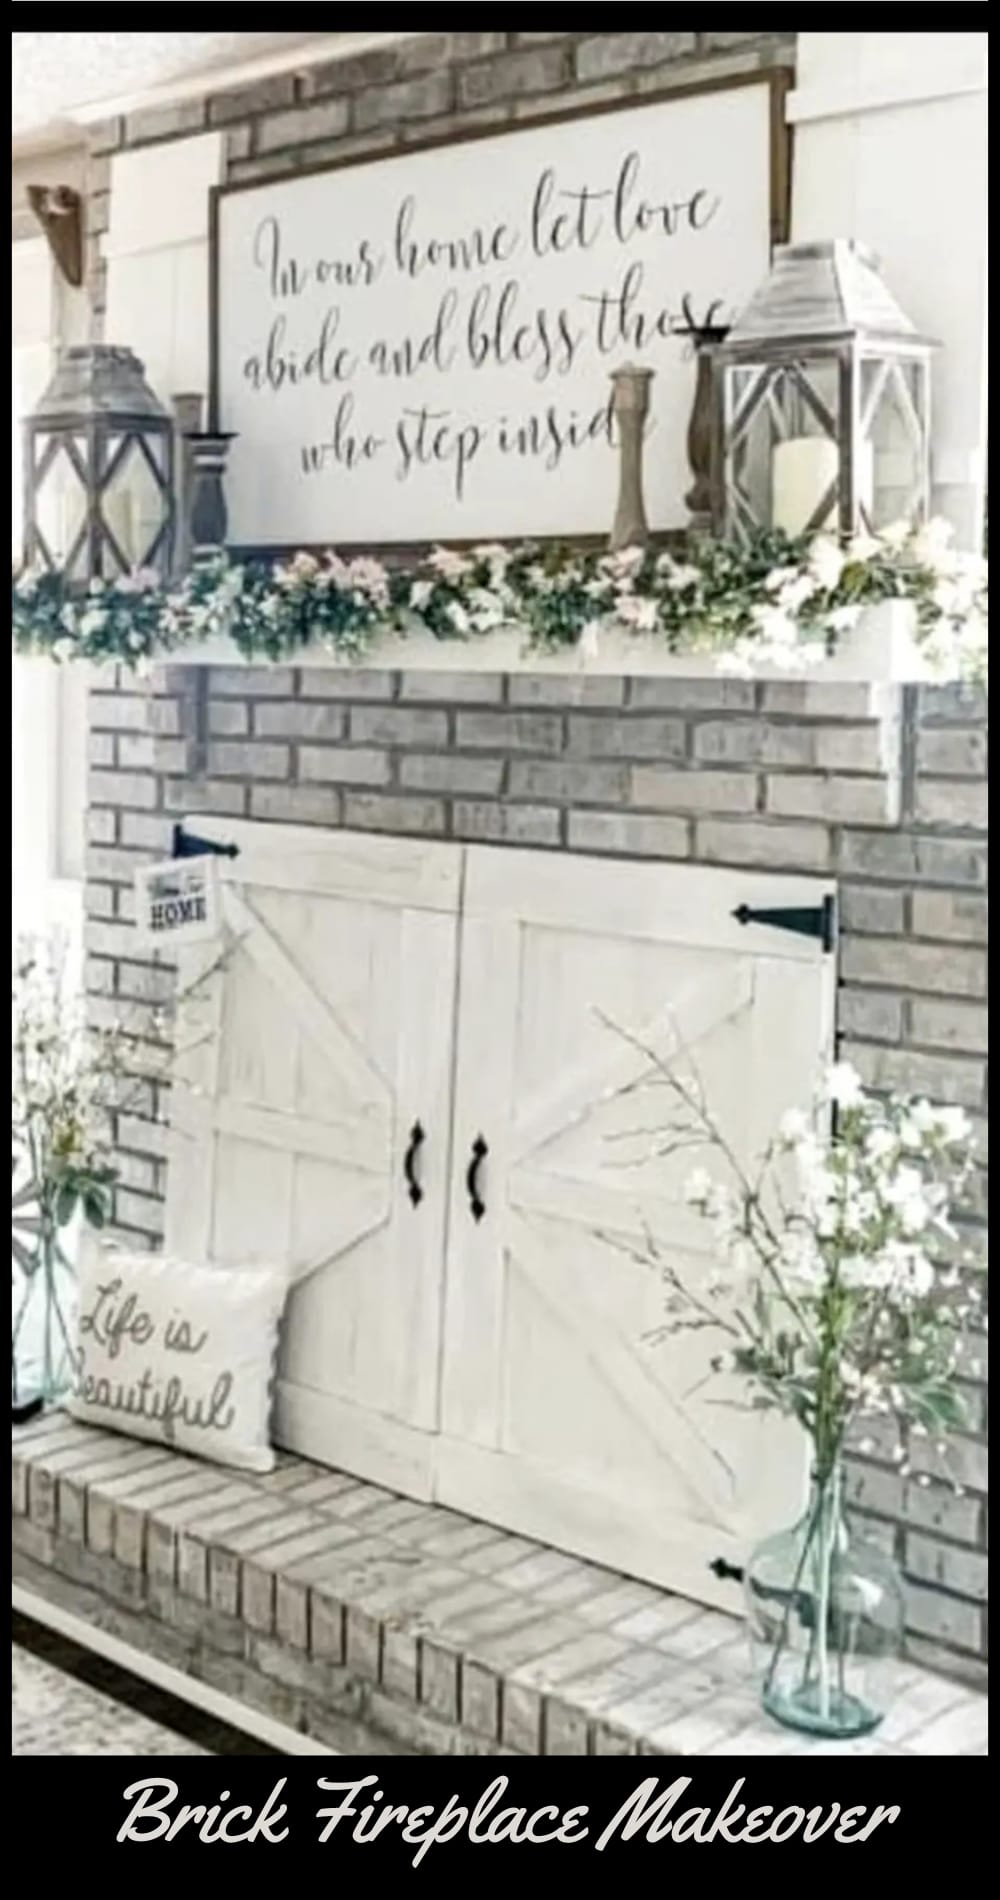 Brick fireplace makeover with farmhouse fireplace decor, fireplace doors that look like barn doors and white washed brick all pulled together with Dollar Tree and Hobby Lobby farmhouse decorations on the mantel and hearth